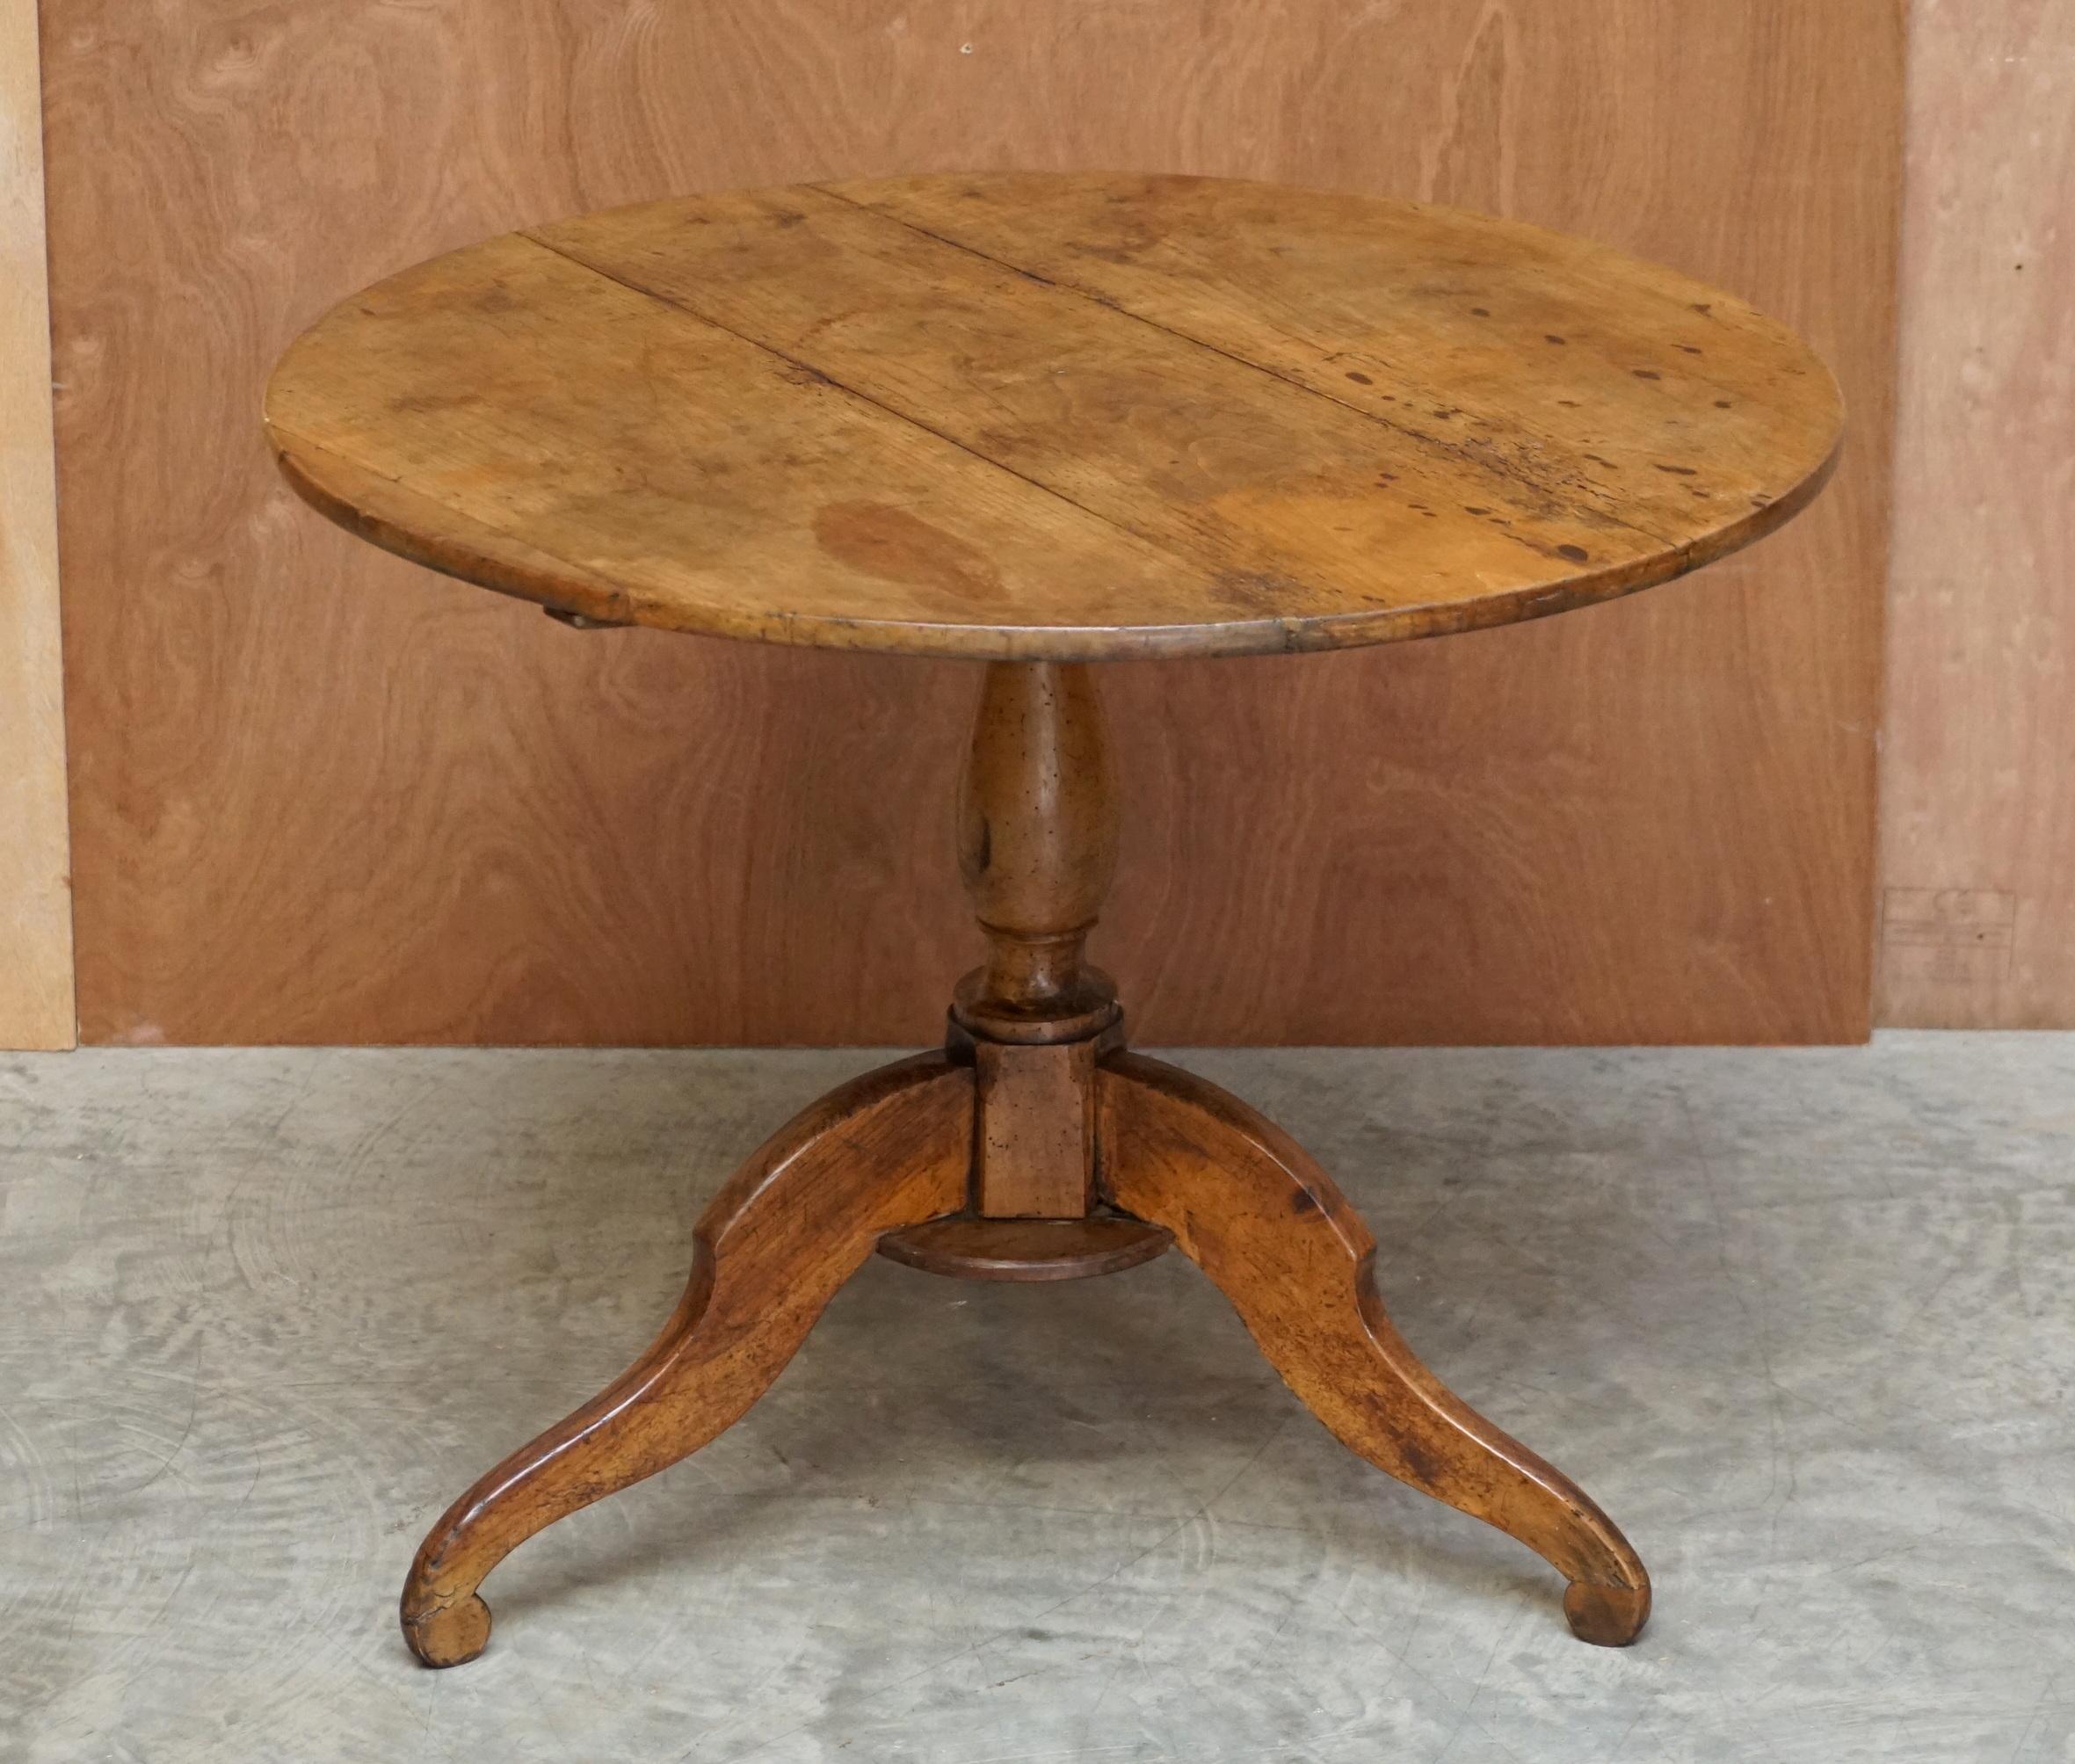 We are delighted to offer this lovely hand made in England Victorian Fruitwood cricket table with tilt top function

This piece is exquisite, the three plank top has a stunning patina which looks absolutely glorious in any setting. This is classed